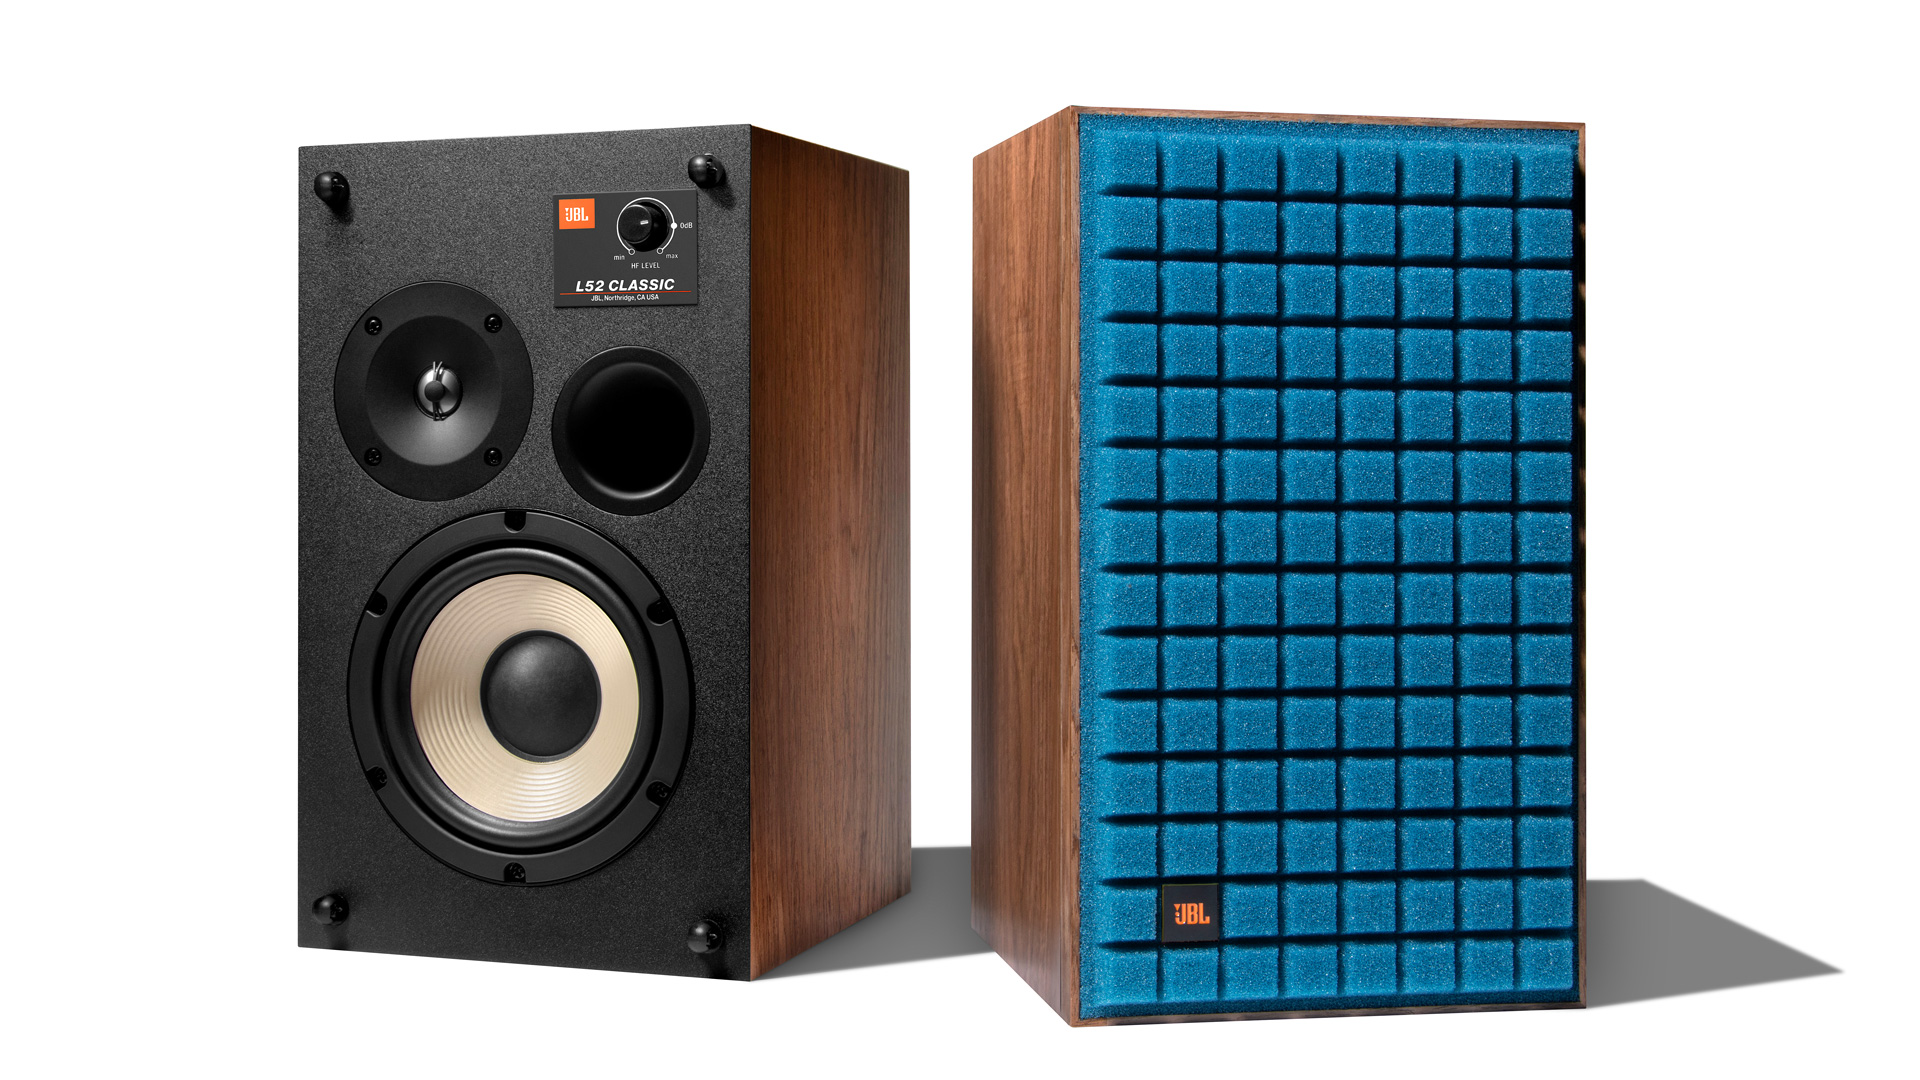 The new JBL L52 Classic without and with Grille in Blue (Image Credit: JBL/Harman Luxury Audio)